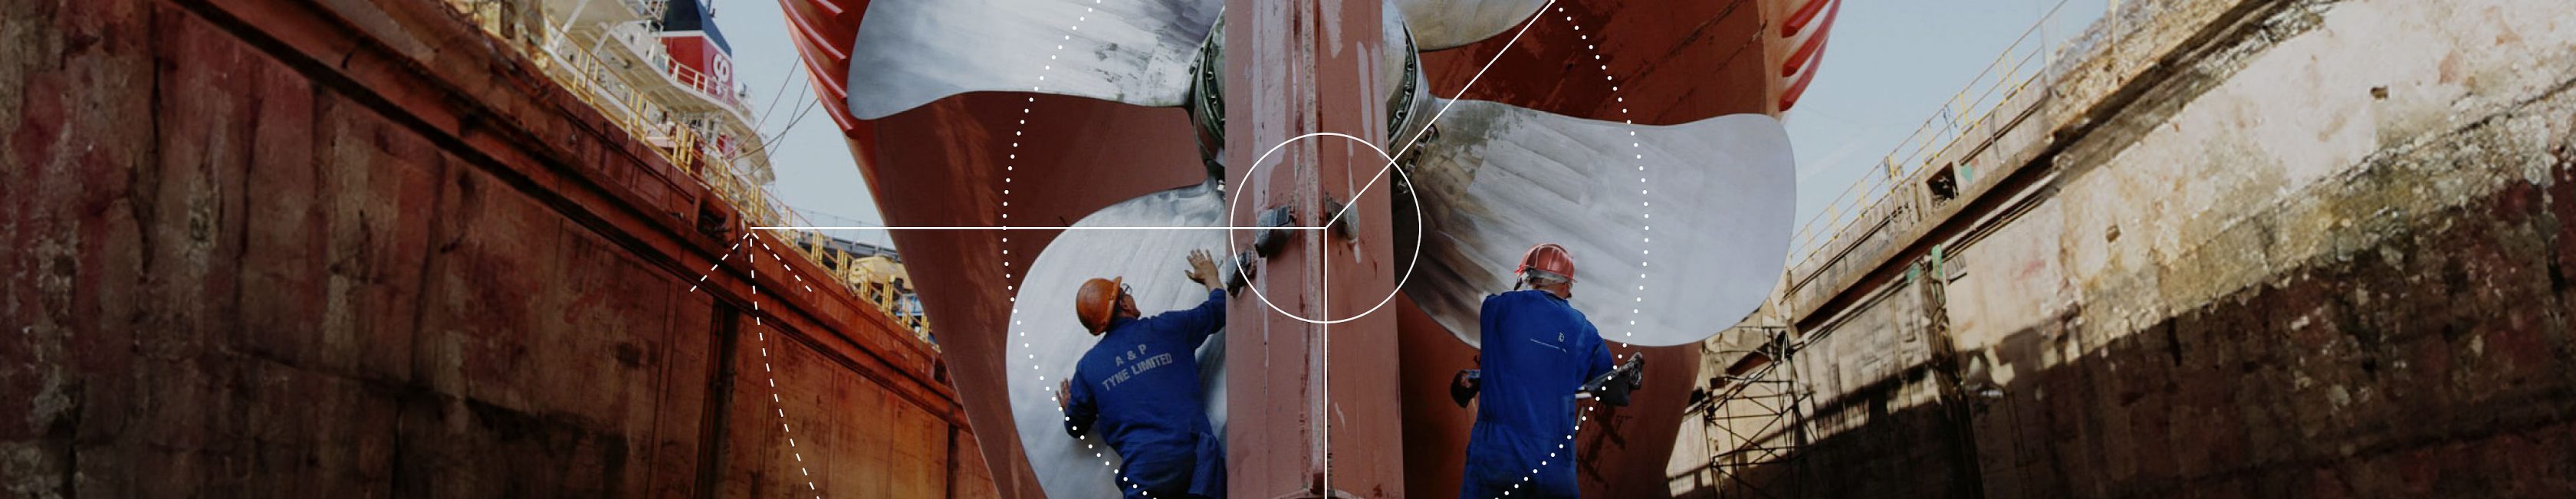 Two workers working on a large ship's propeller